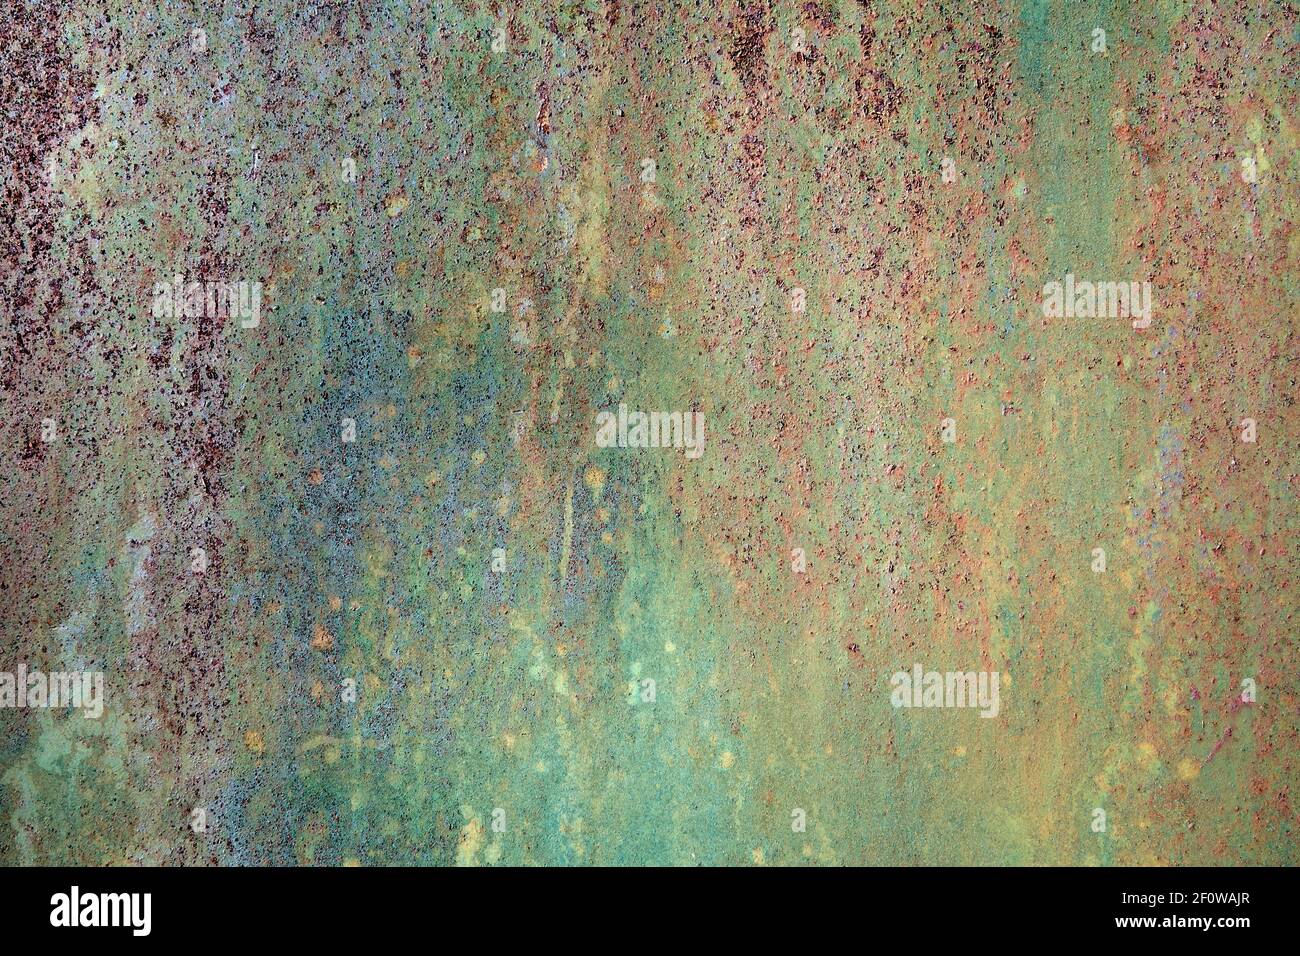 Close up of corrosion on a metal fuel container Stock Photo